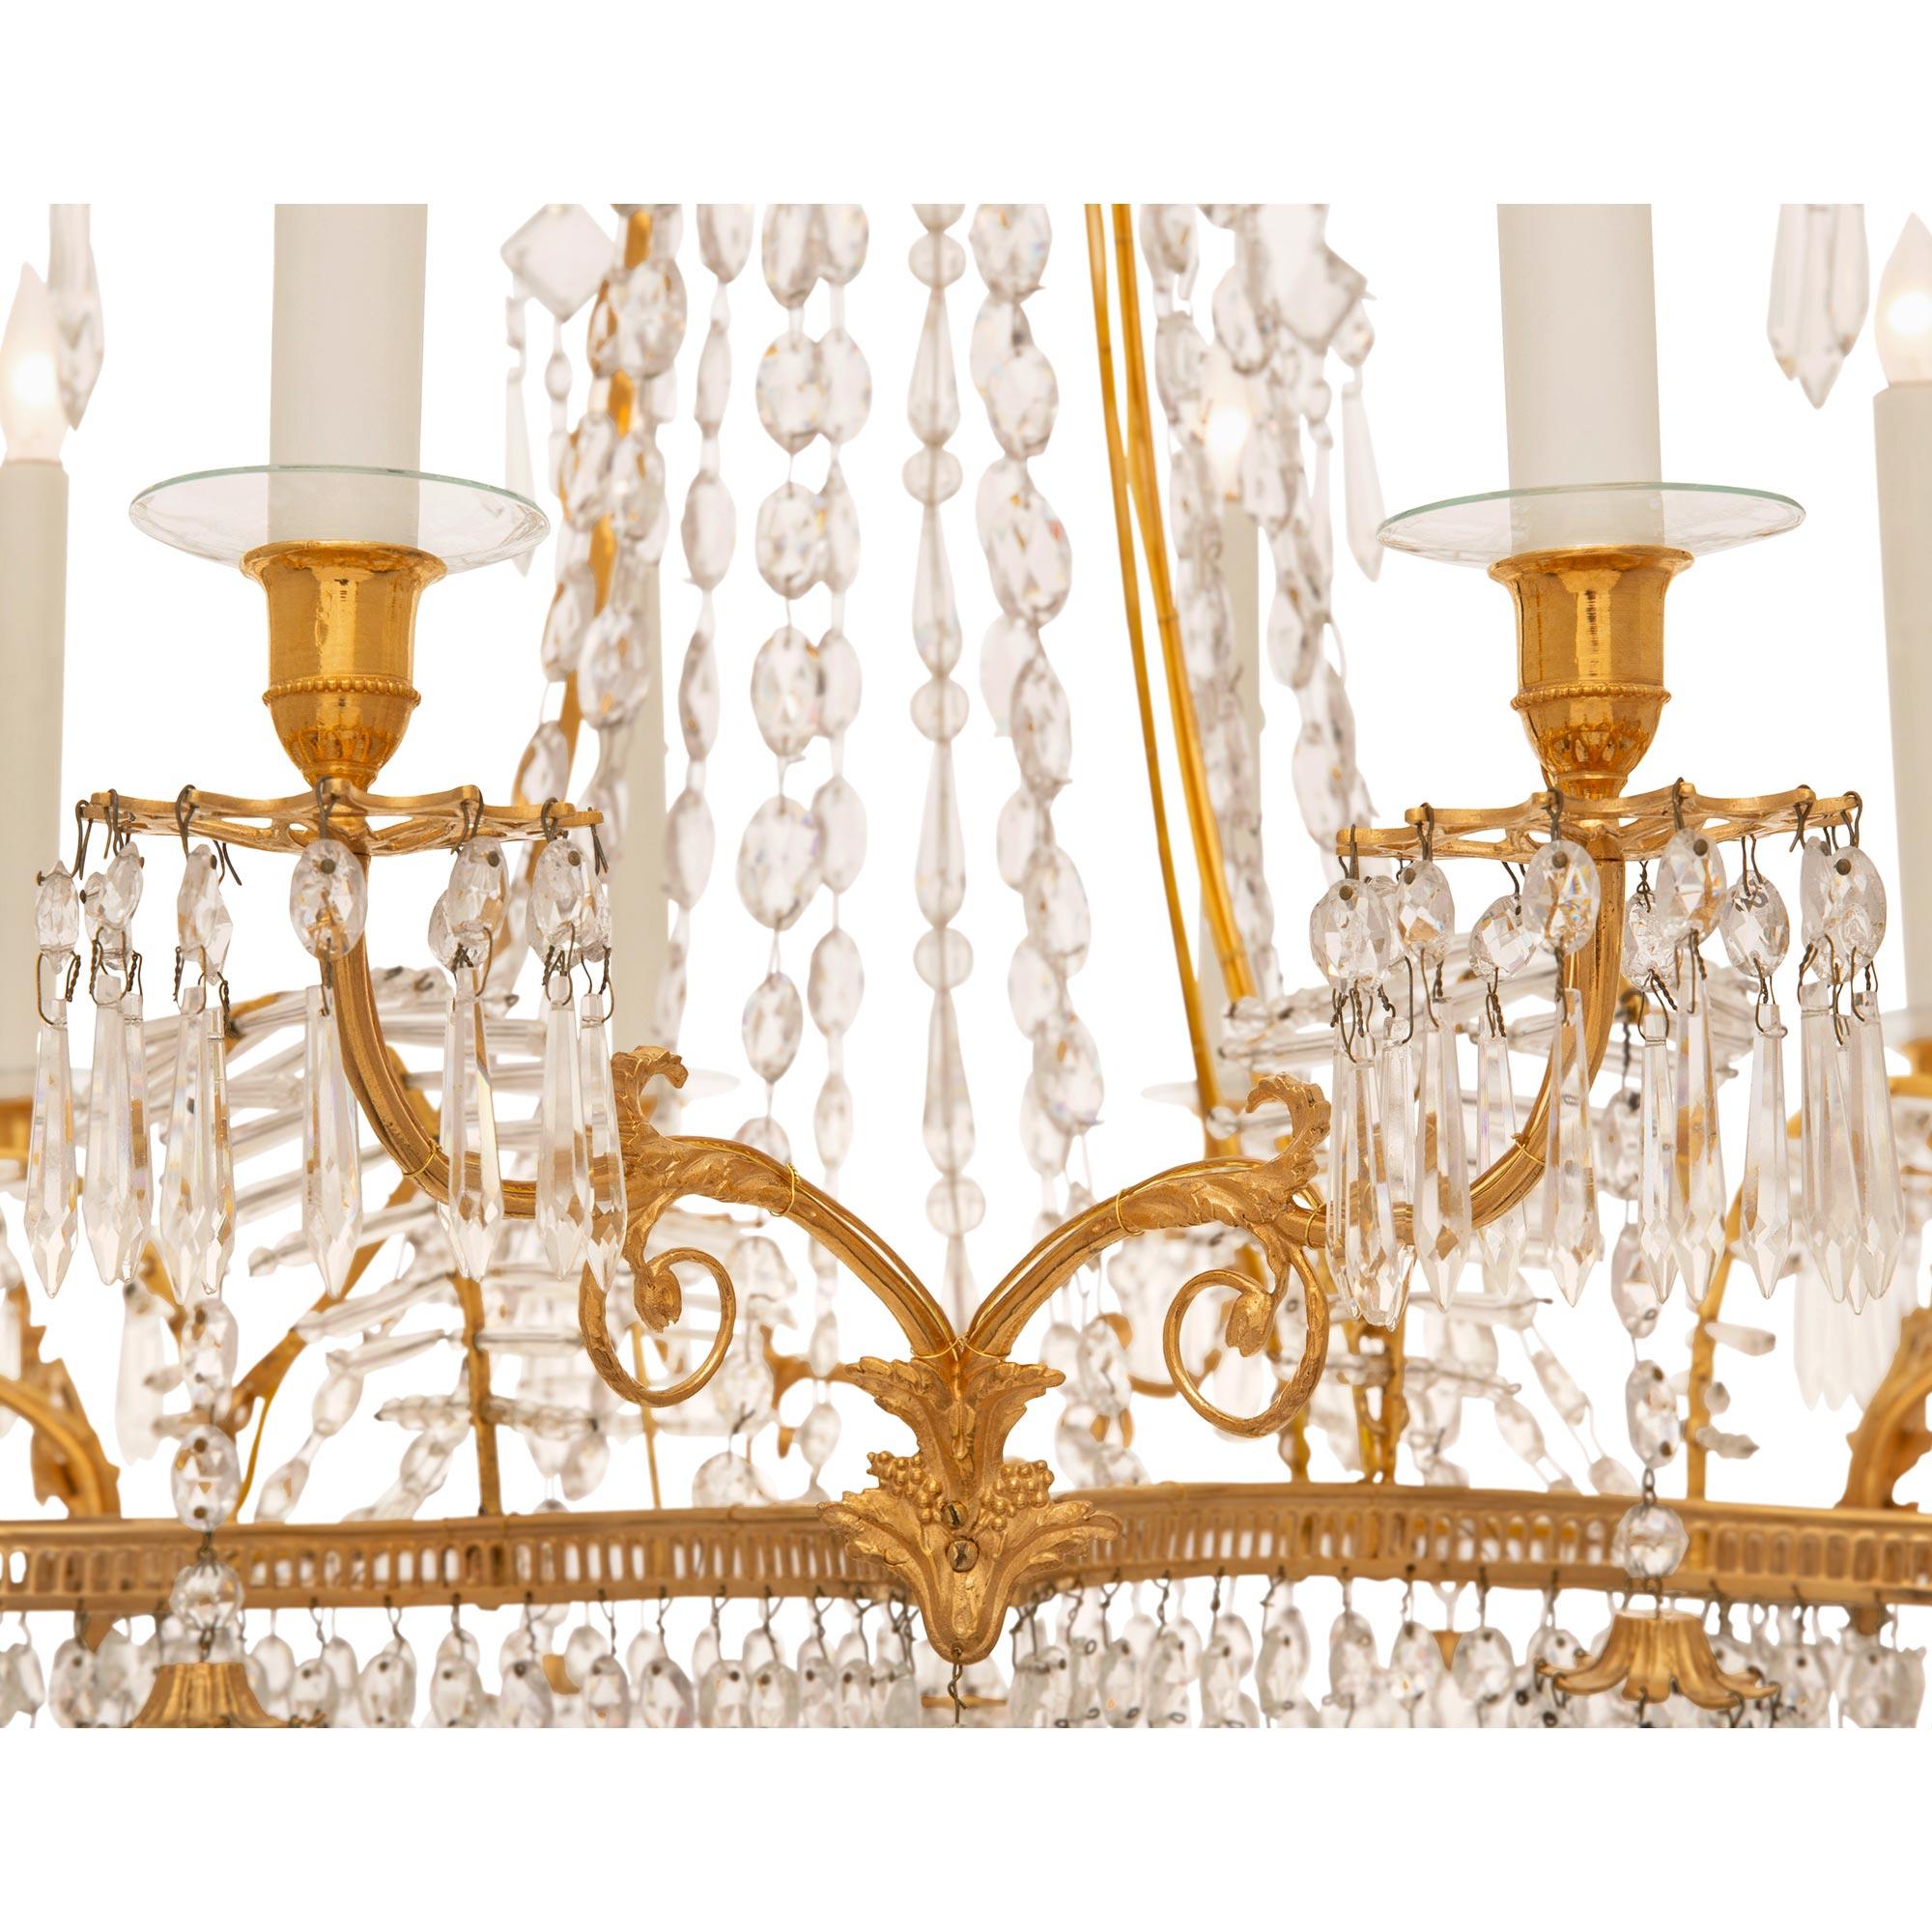 Baltic 19th century Ormolu and cut glass chandelier In Good Condition For Sale In West Palm Beach, FL